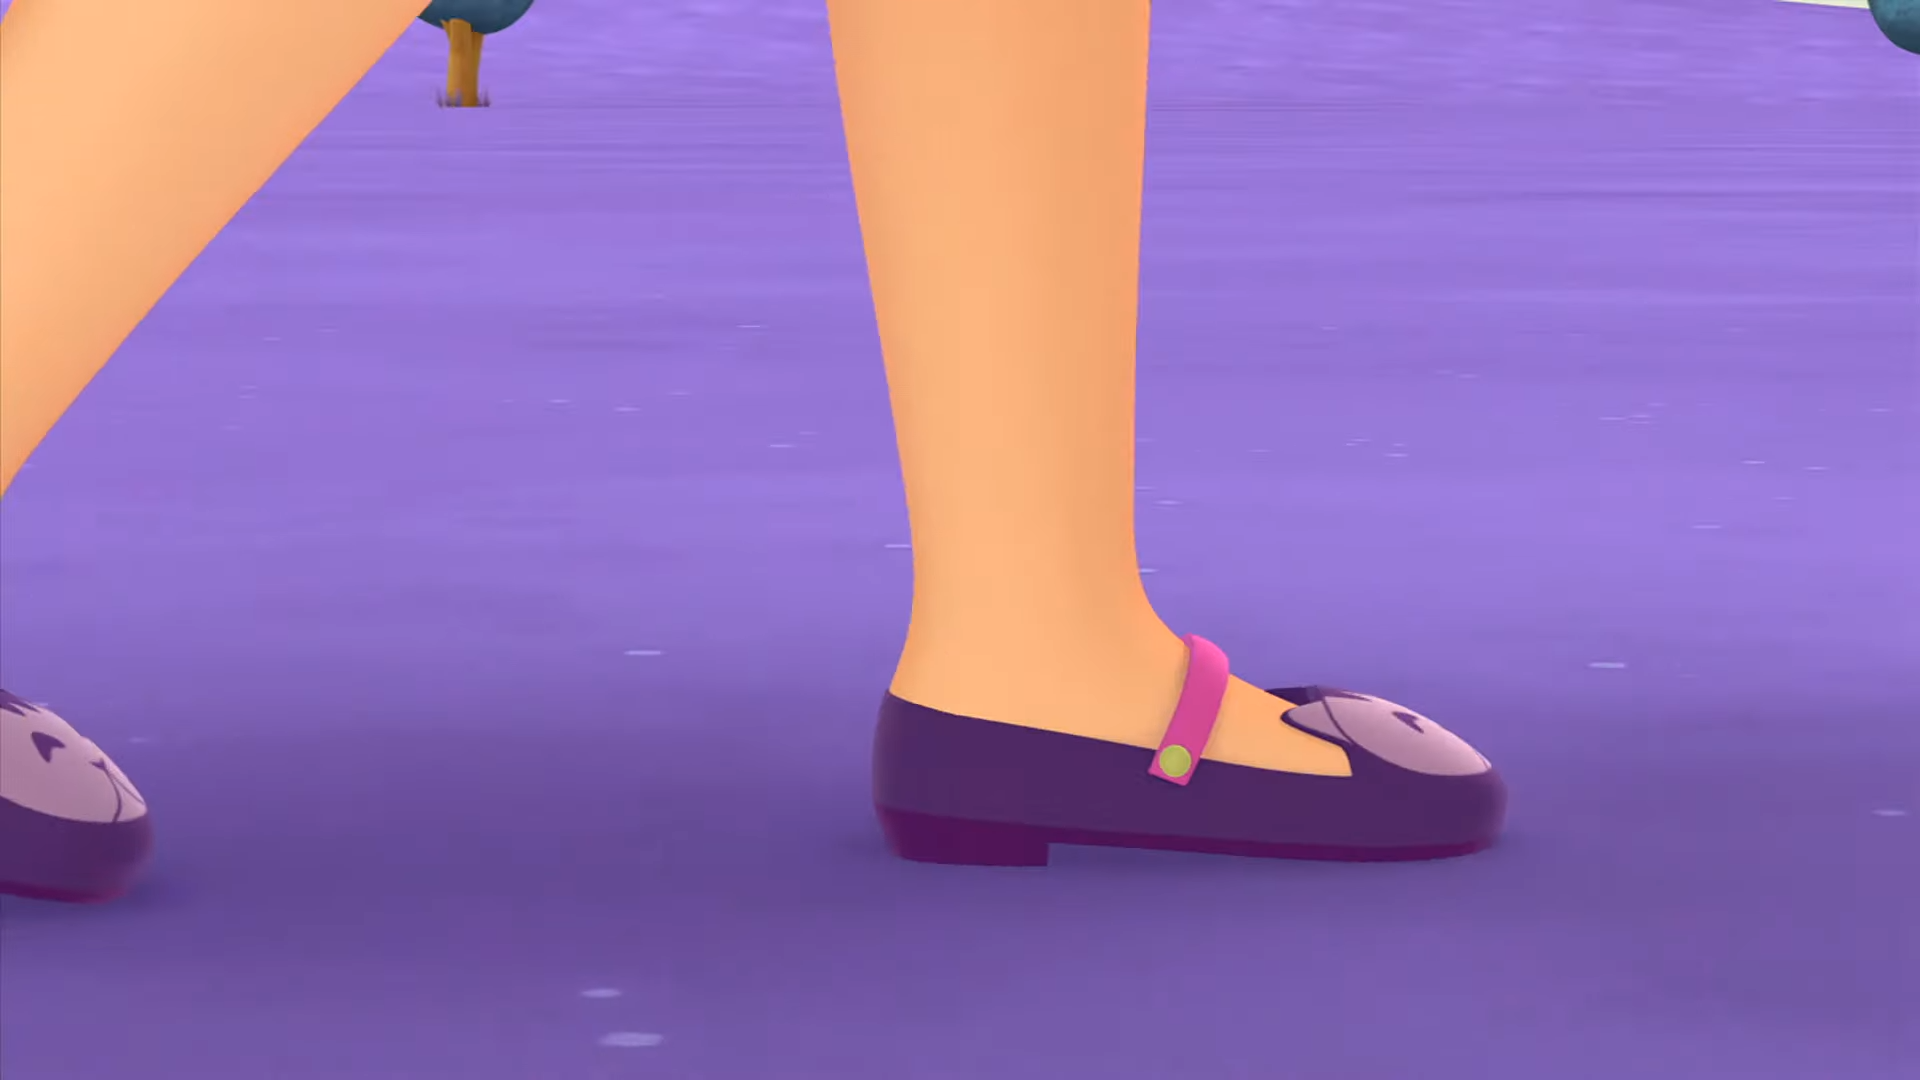 a cartoon of a person's leg and purple shoe